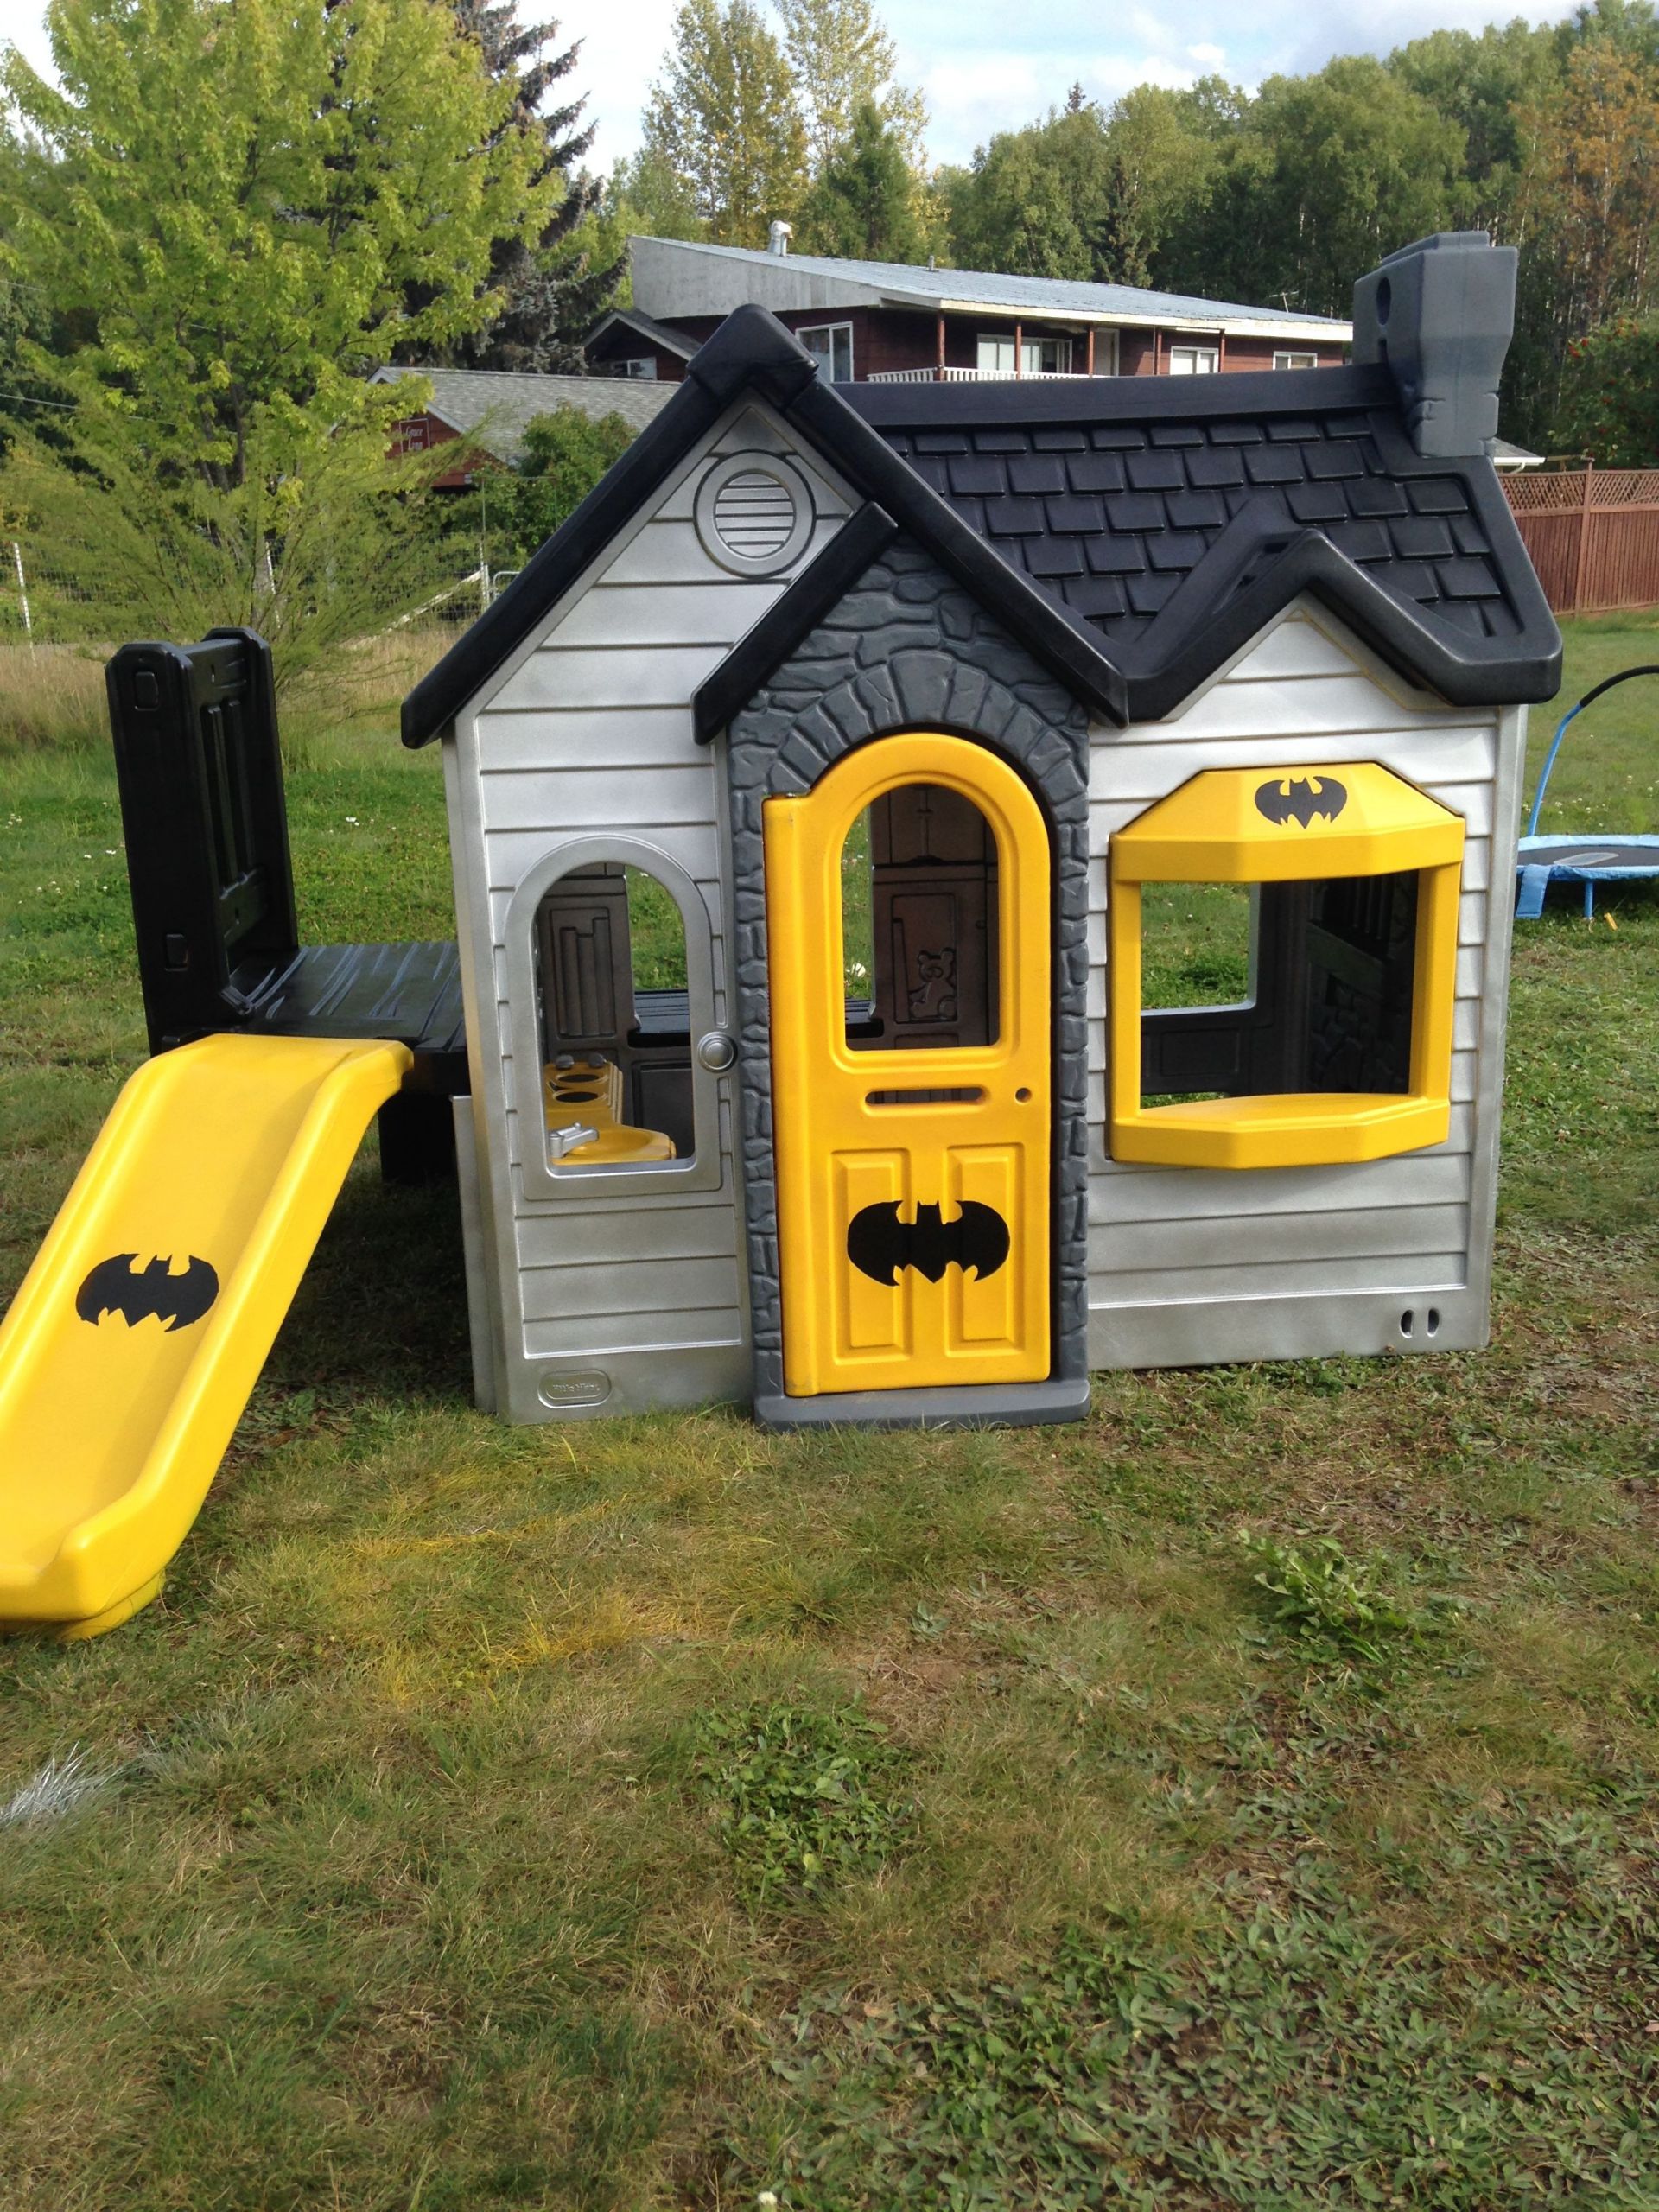 Kids Outdoor Plastic Playhouses
 The playhouse redo and remodel for the kids Batman